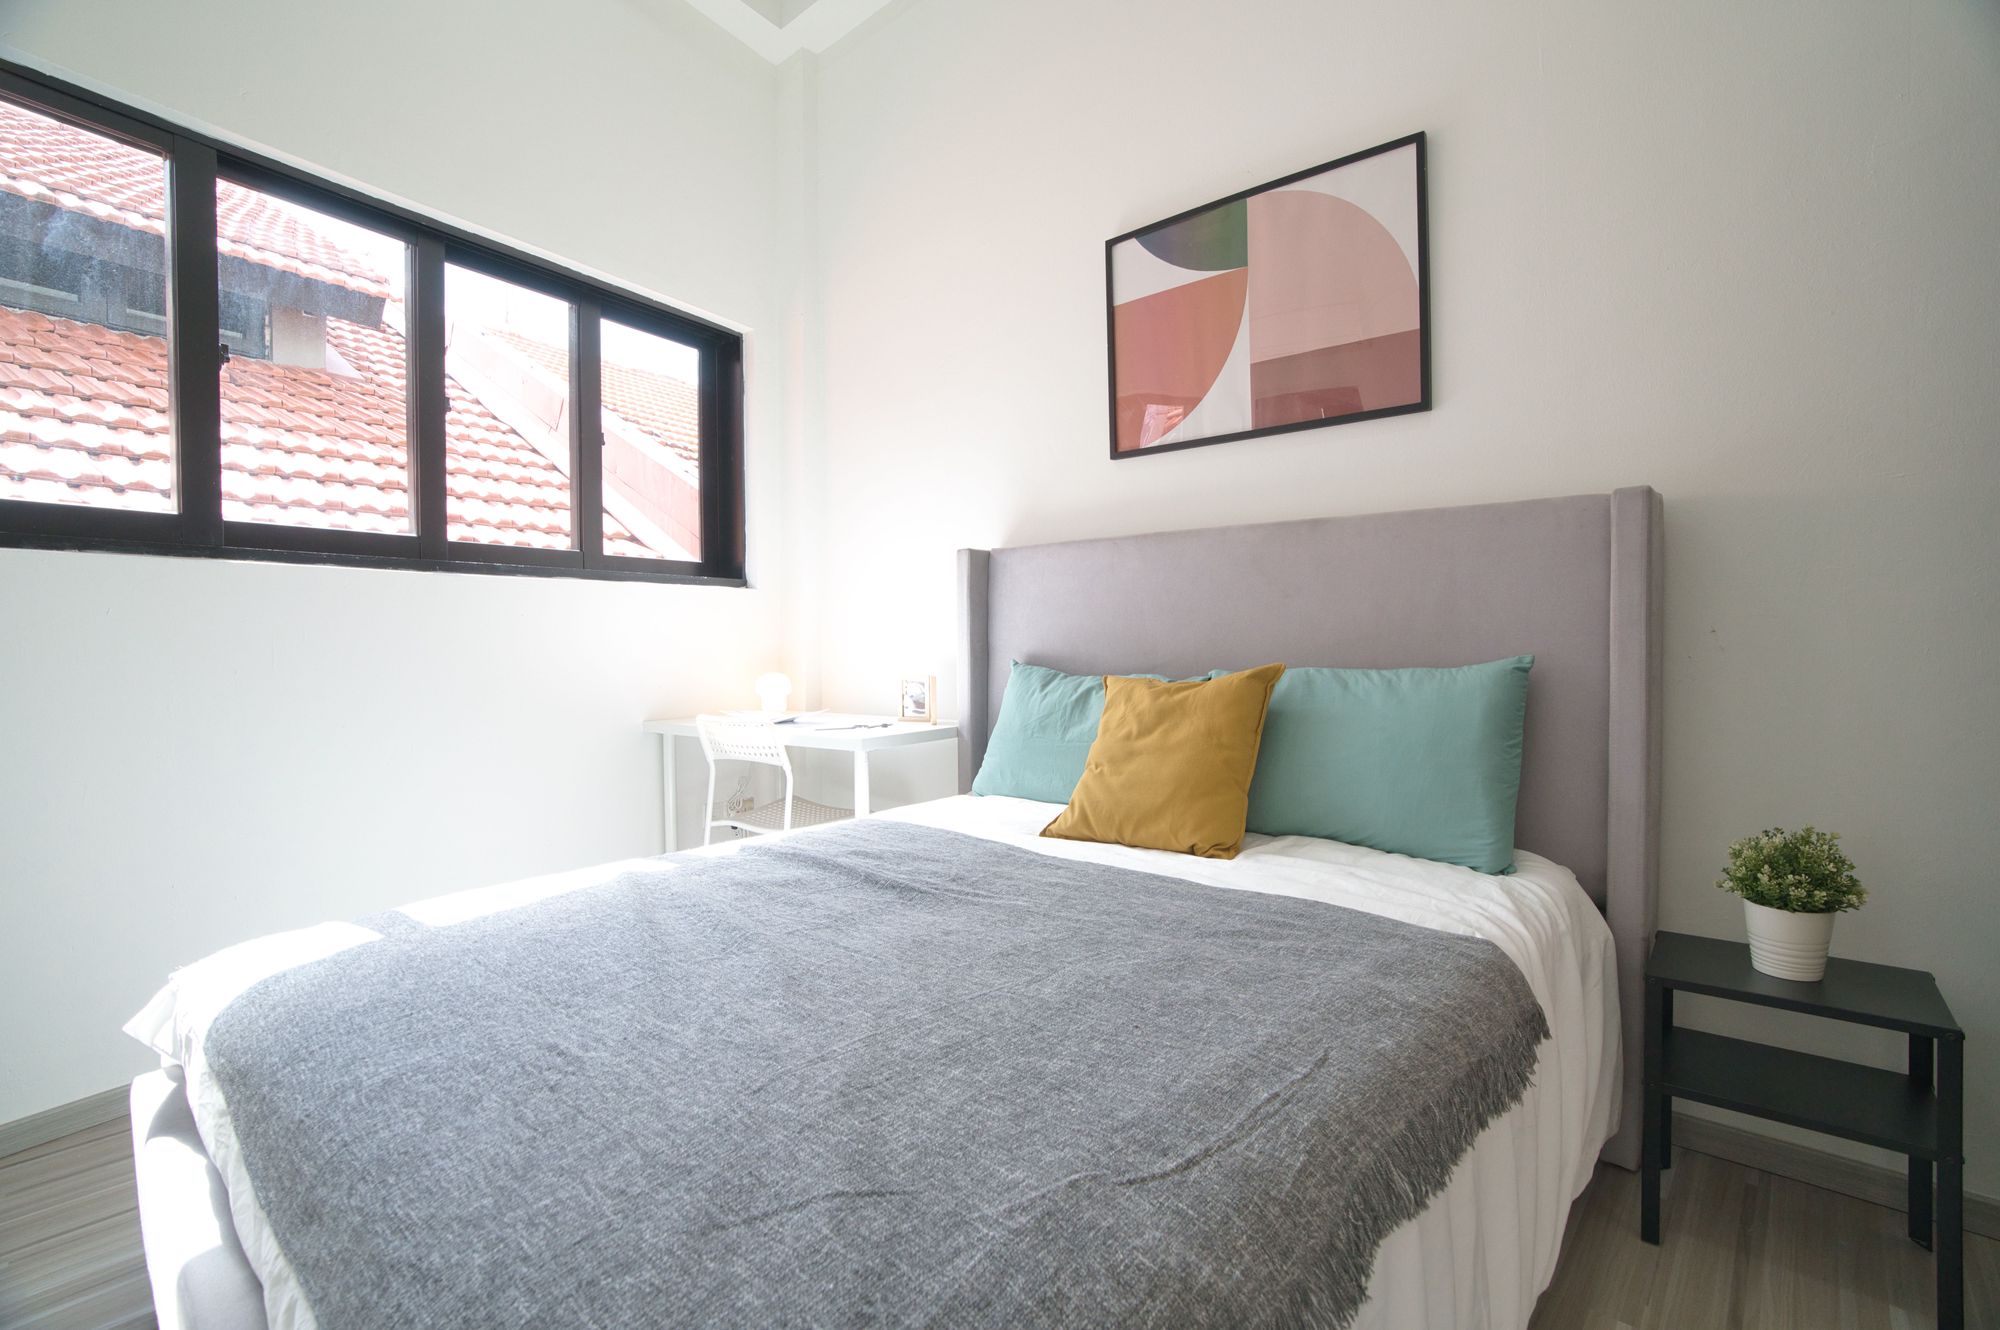 typical Cove singapore room for rent, pillows, bedside table and study desk included